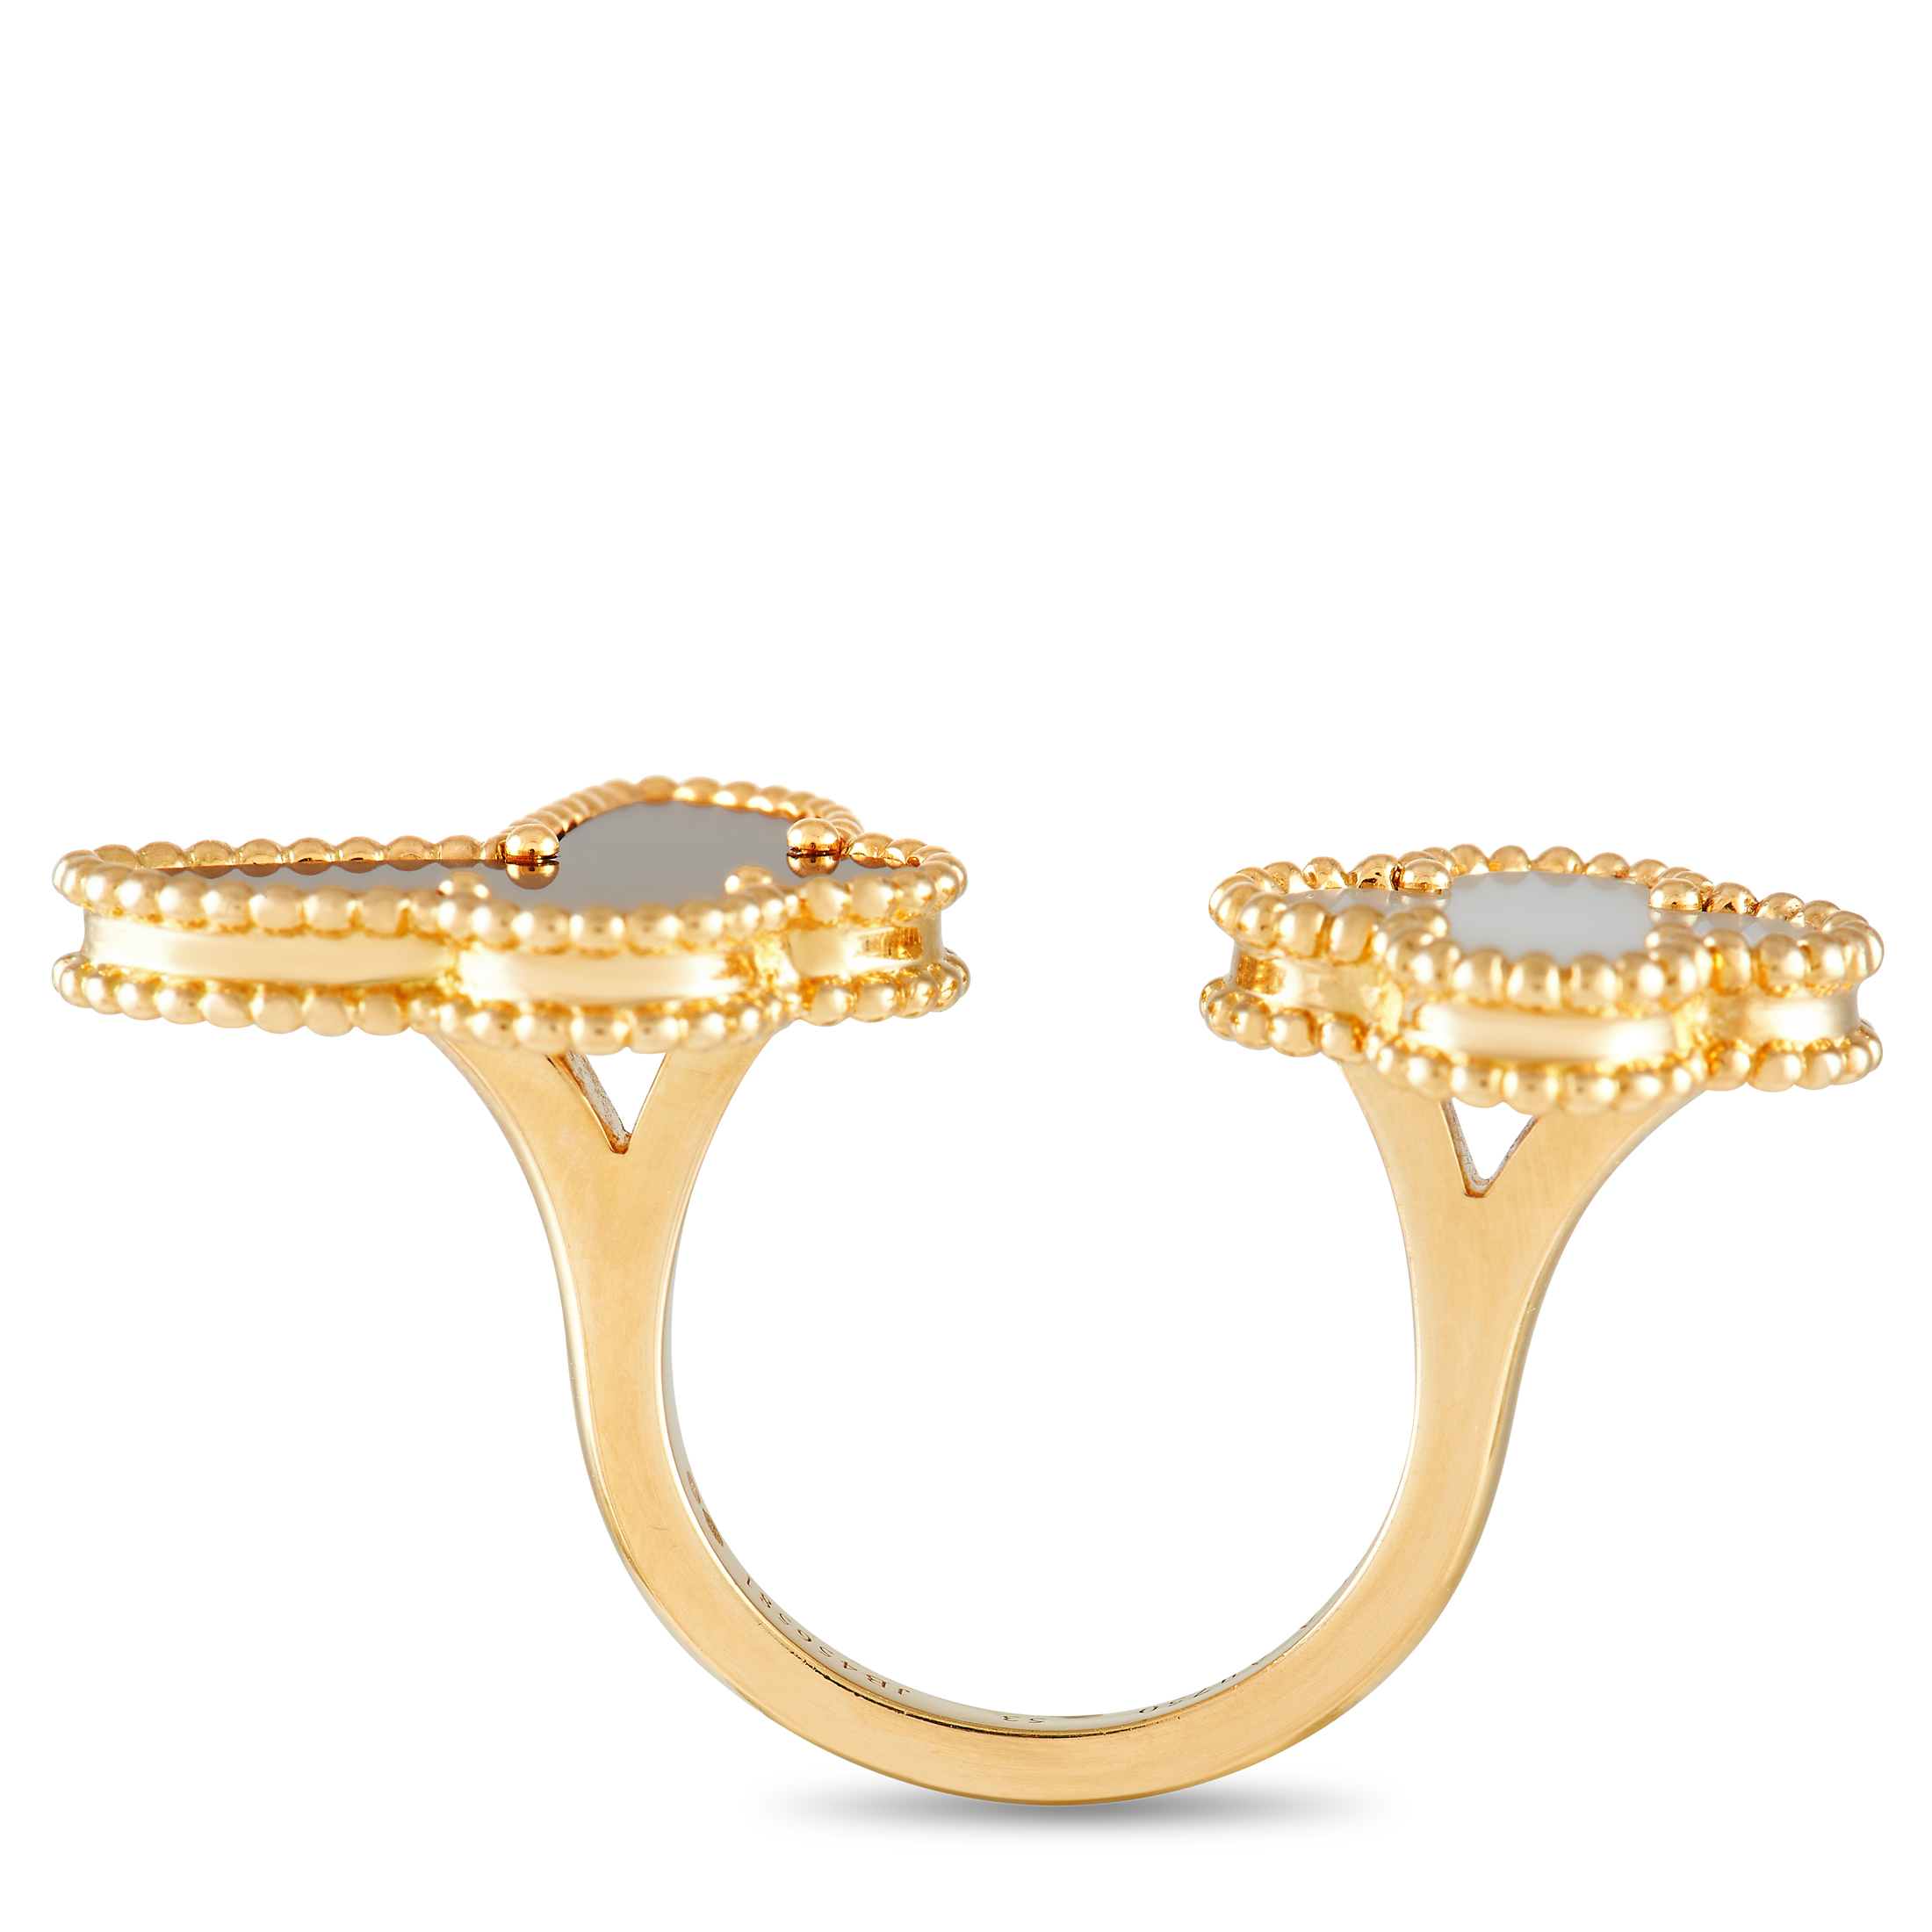 Lucky Alhambra Between the Finger ring 18K yellow gold, Mother-of